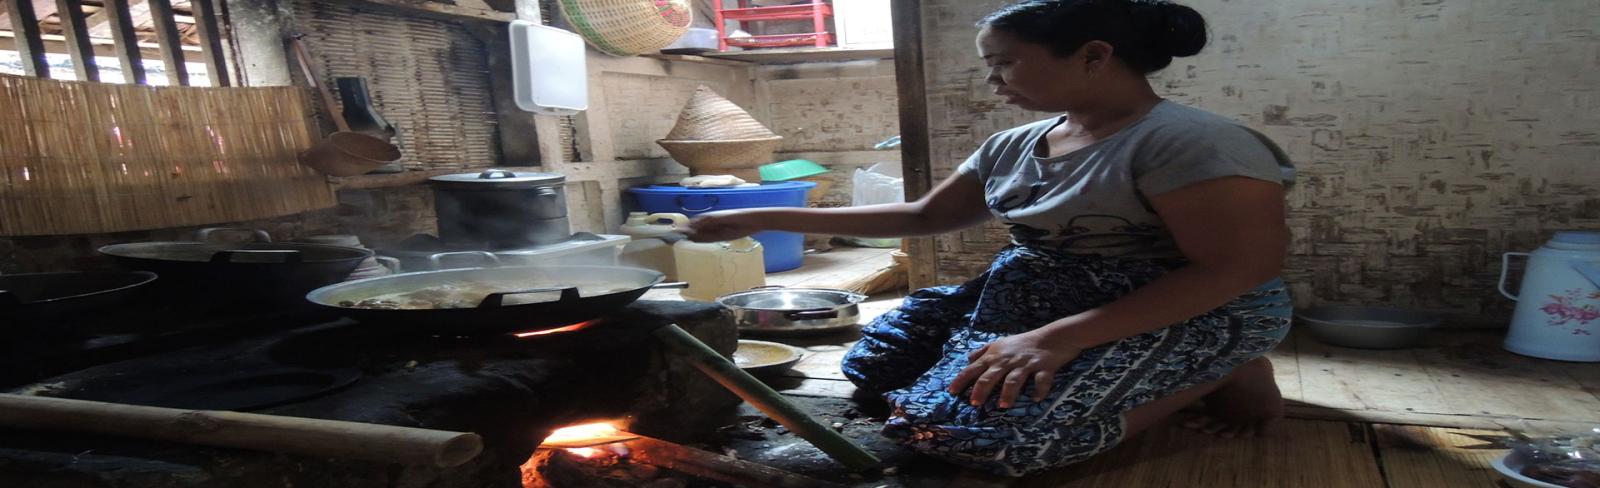 Indonesia Clean Cooking: ESMAP Supports Innovative Approaches to Build the Local Cookstoves Market, Helps Increase Access